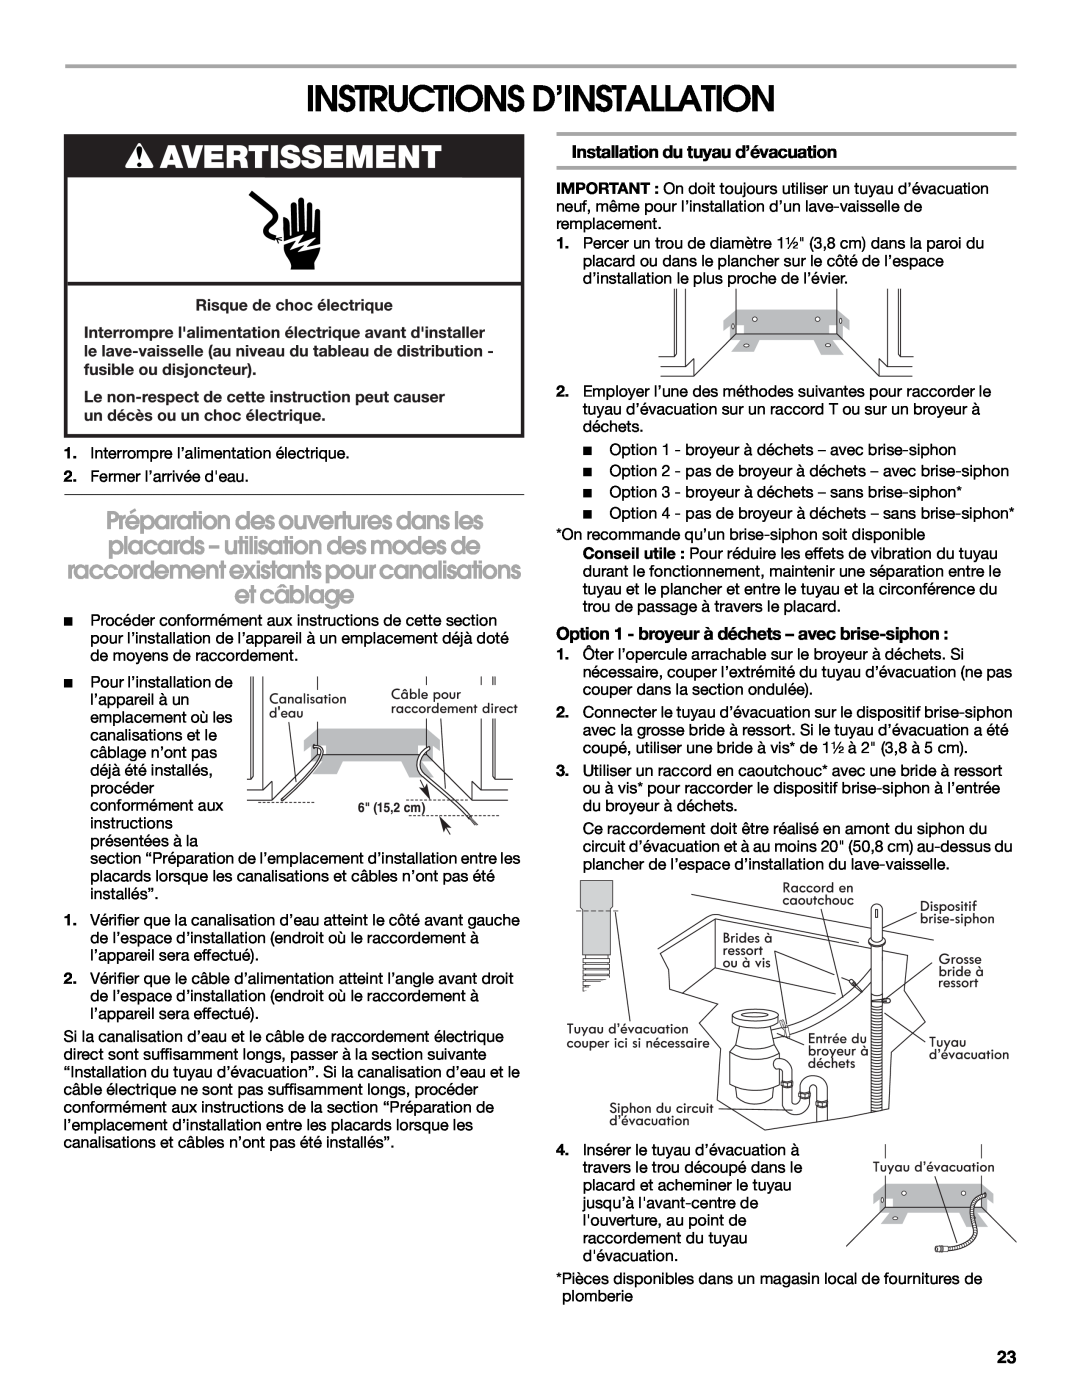 Whirlpool W10282559A installation instructions Instructions D’Installation, Installation du tuyau d’évacuation 